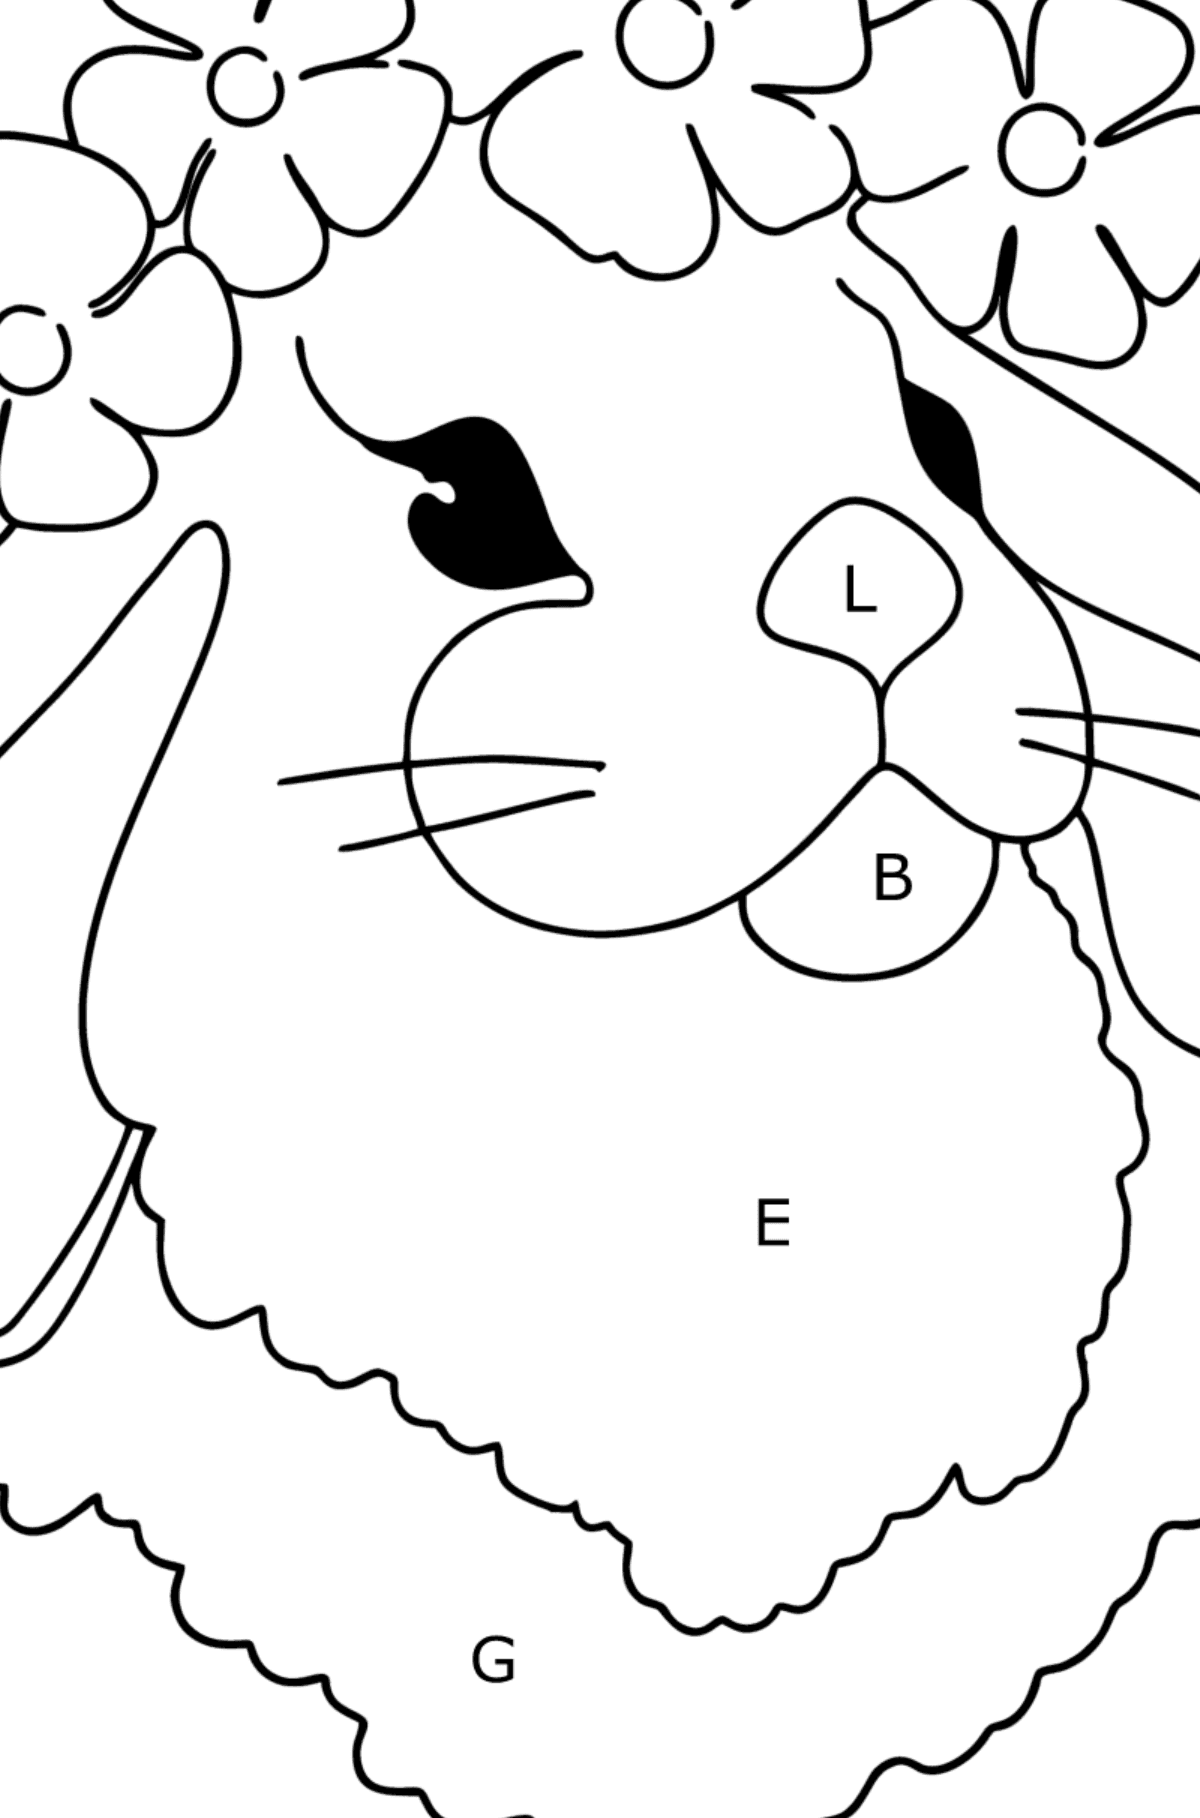 Hare Face coloring page - Coloring by Letters for Kids